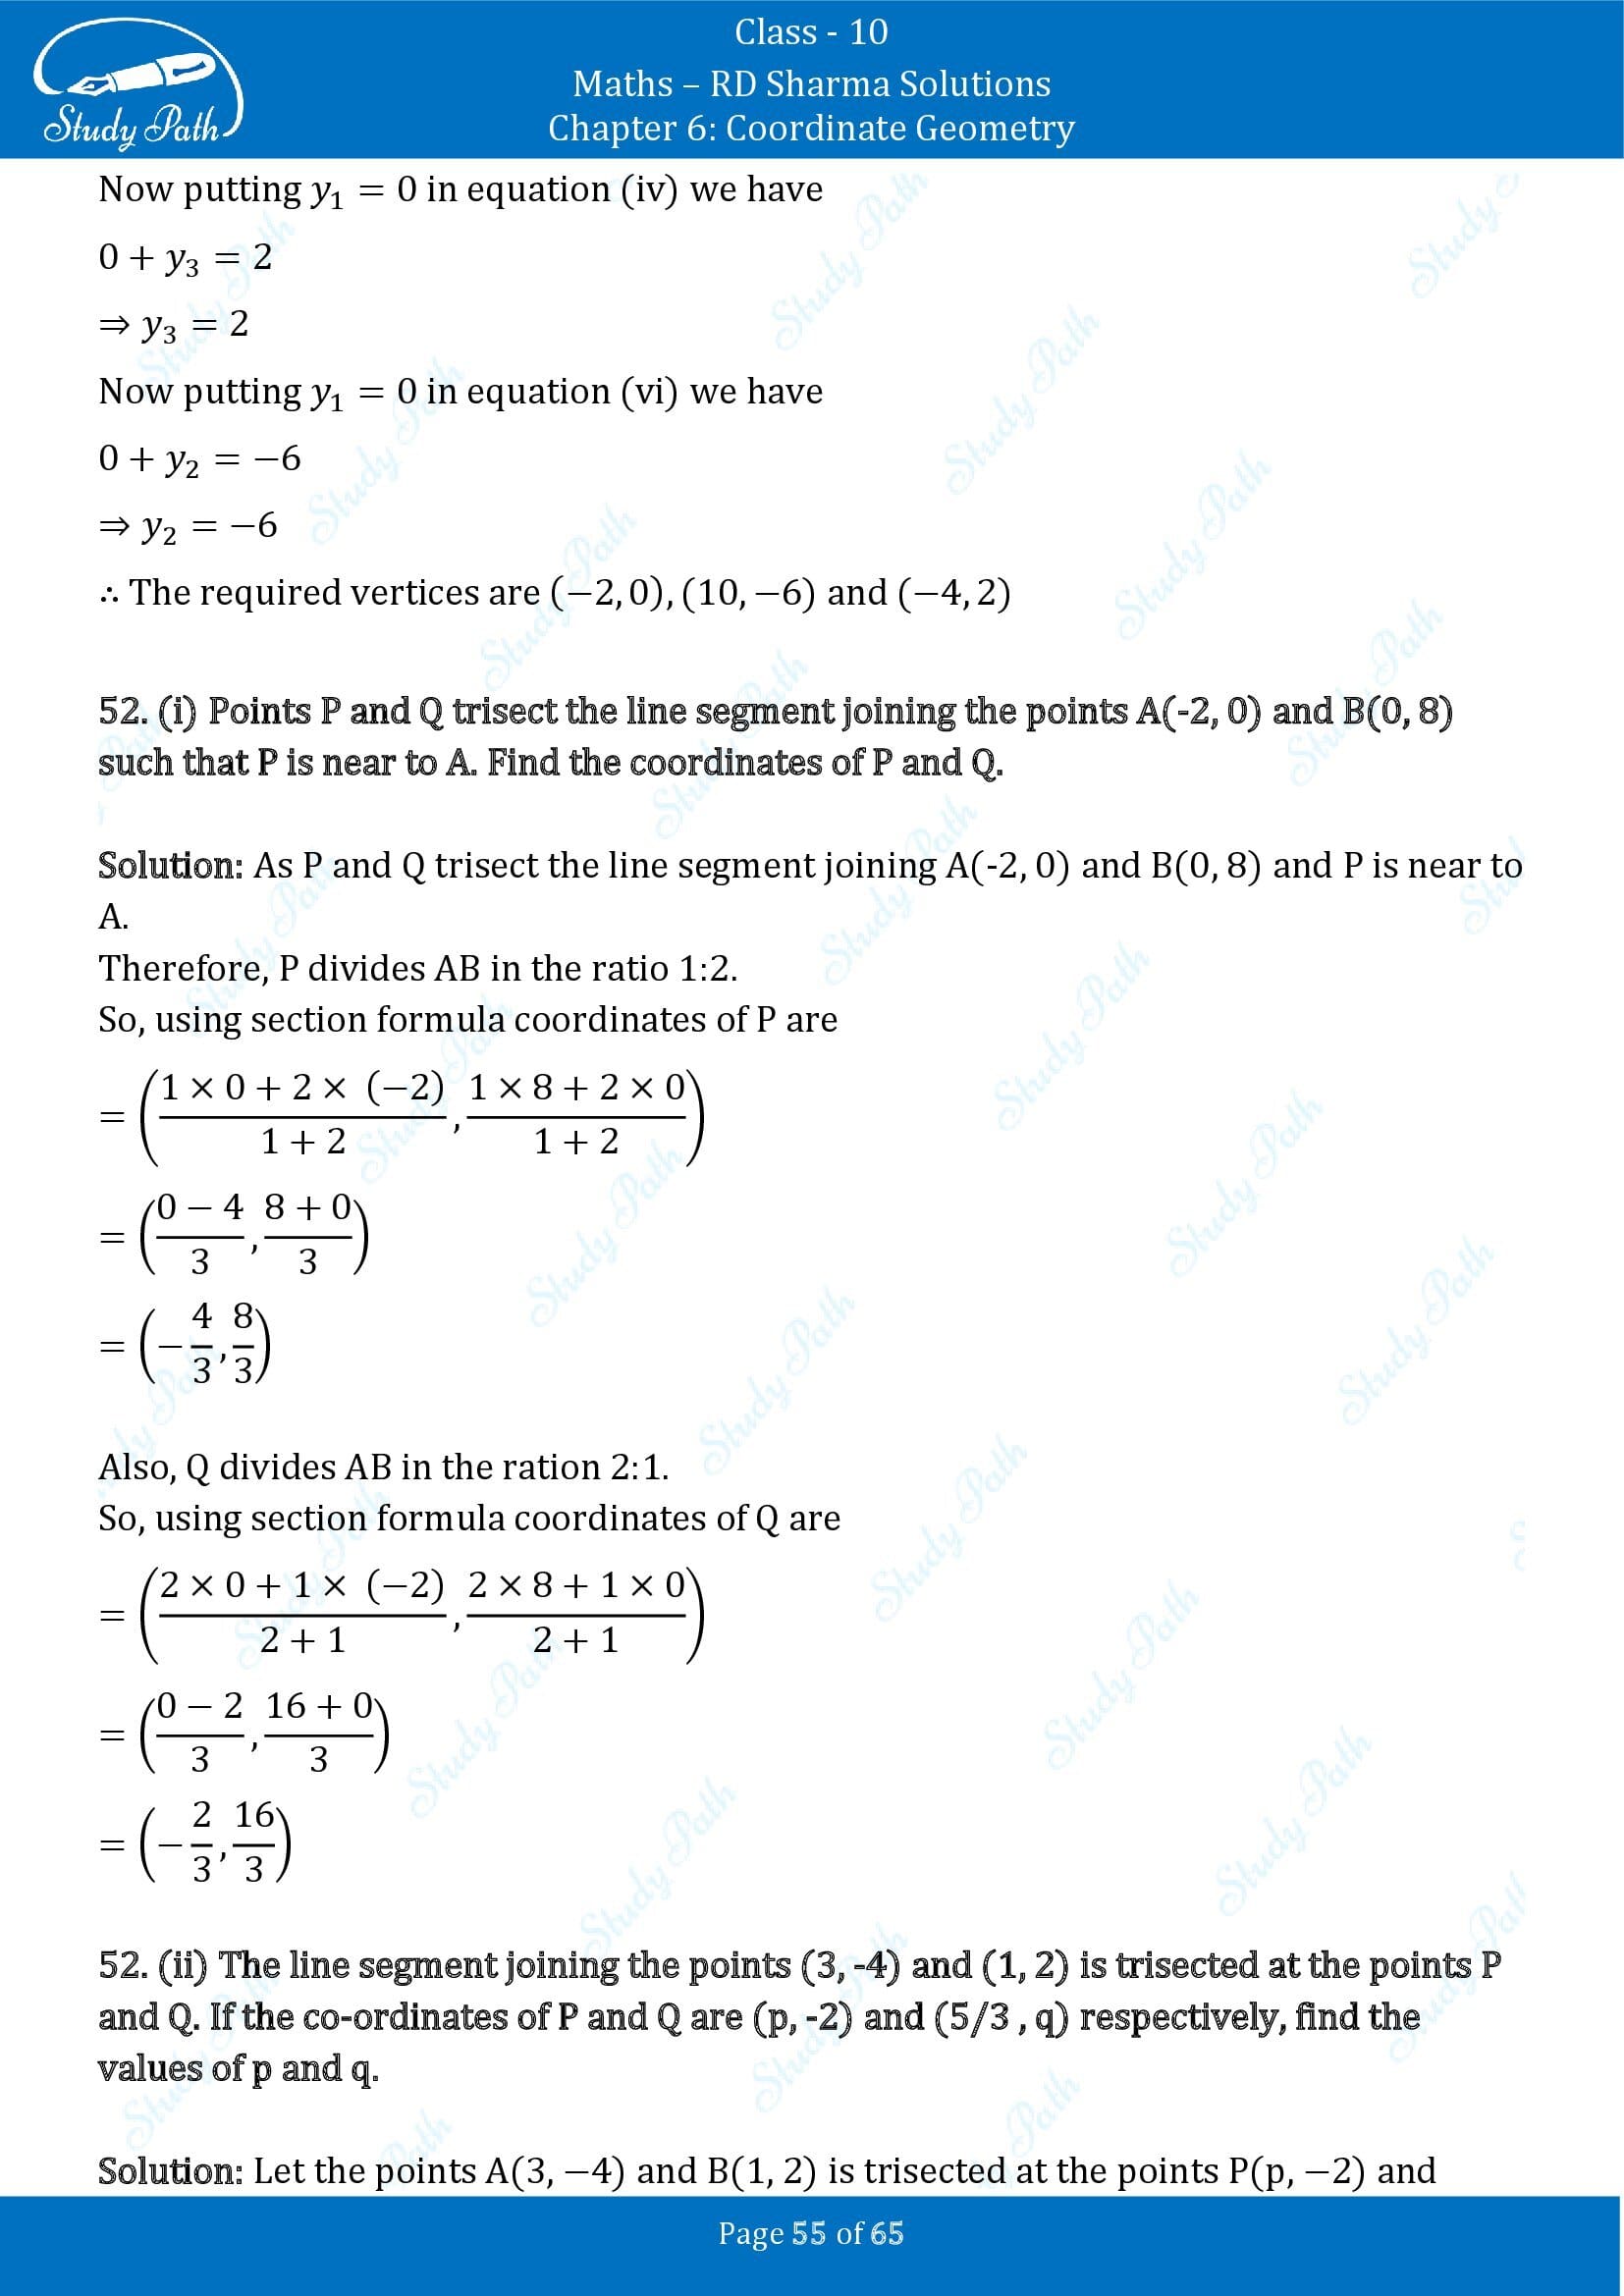 RD Sharma Solutions Class 10 Chapter 6 Coordinate Geometry Exercise 6.3 00055